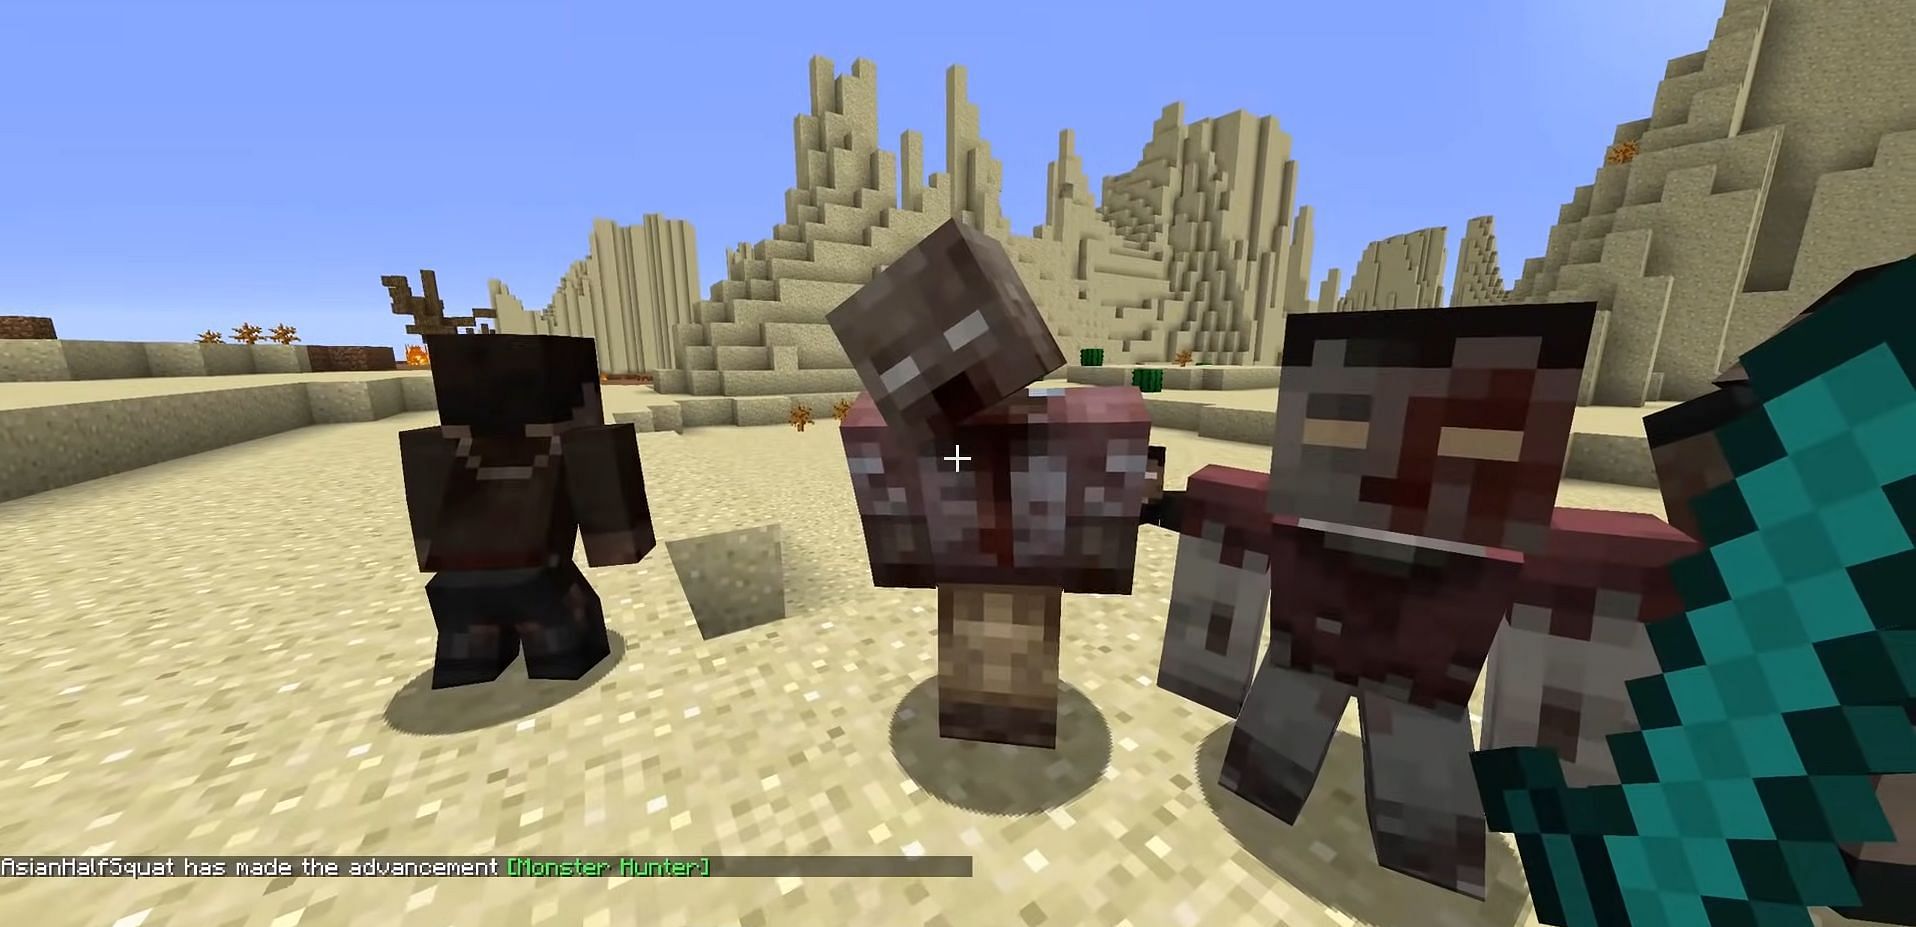 Resource packs can alter Minecraft in many different ways, such as modifying zombie mobs (Image via Mojang)